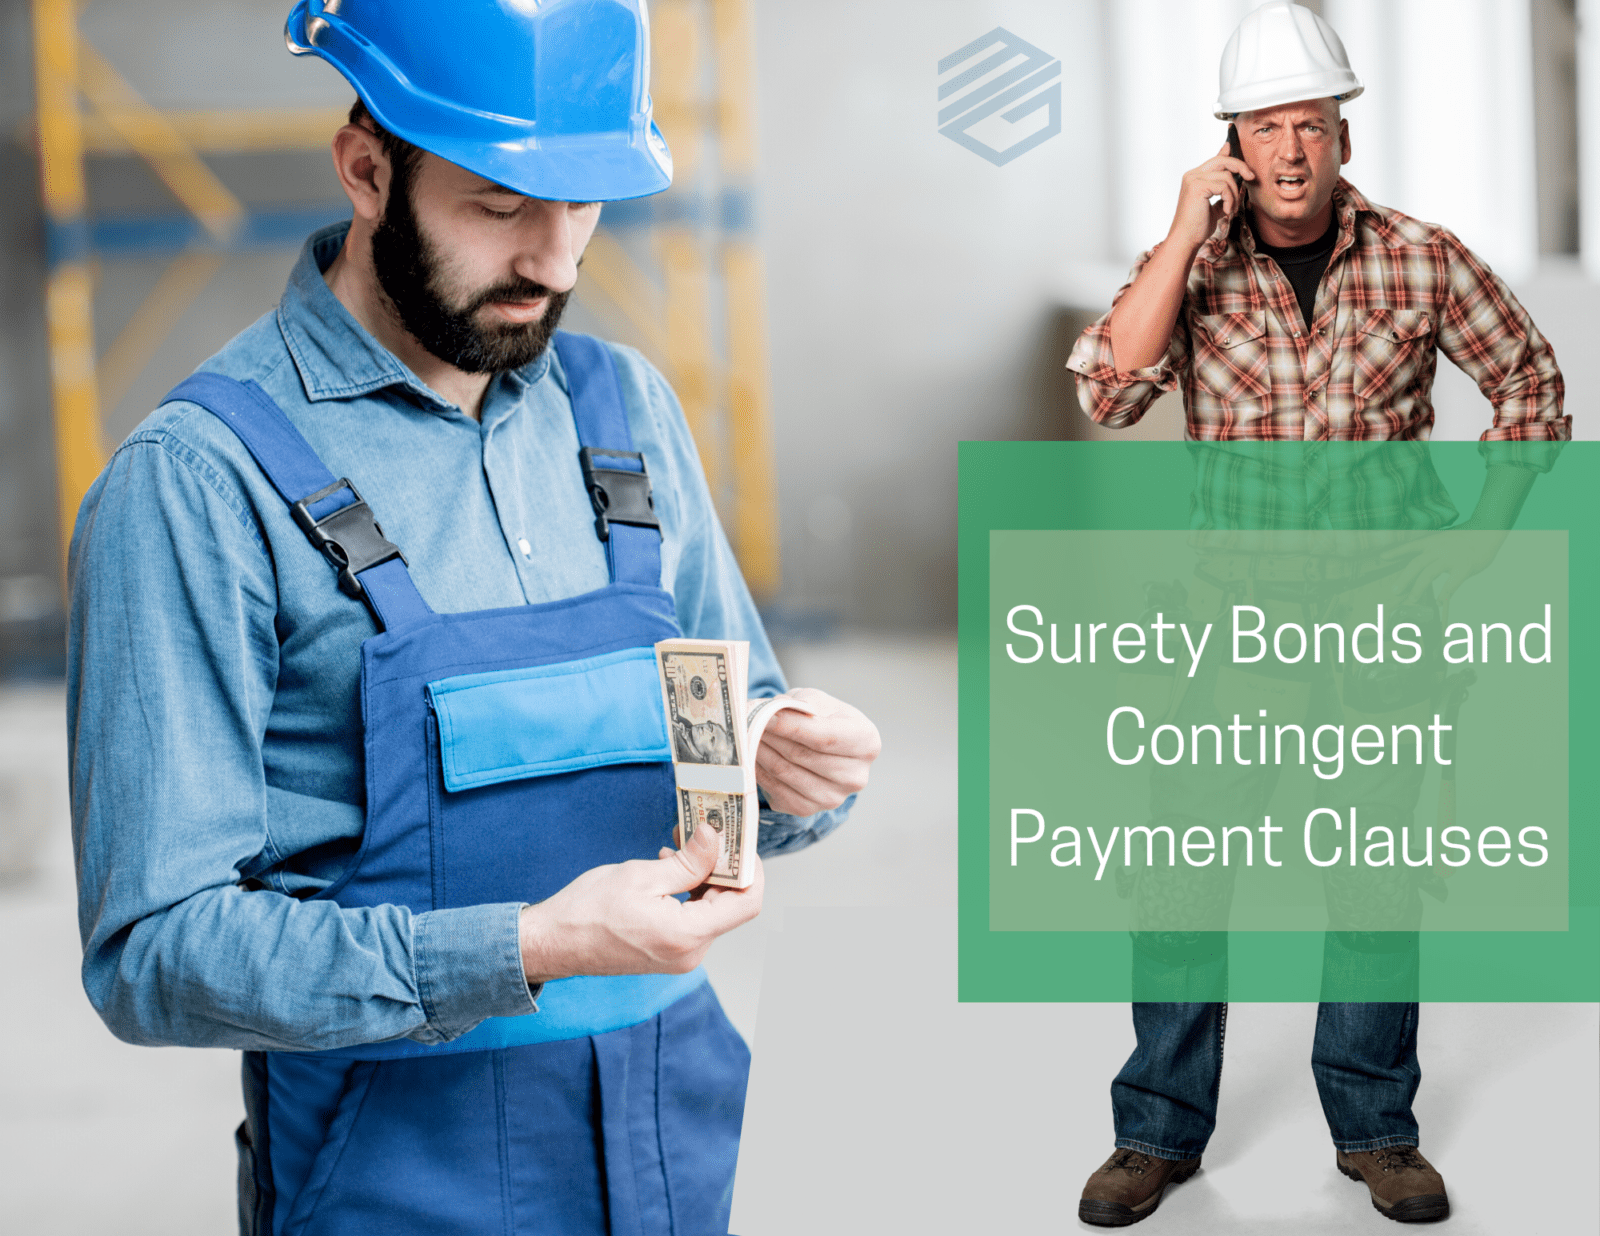 Surety Bonds and Contingent Payment Clauses. Contractor counting money while another contractor looks angry